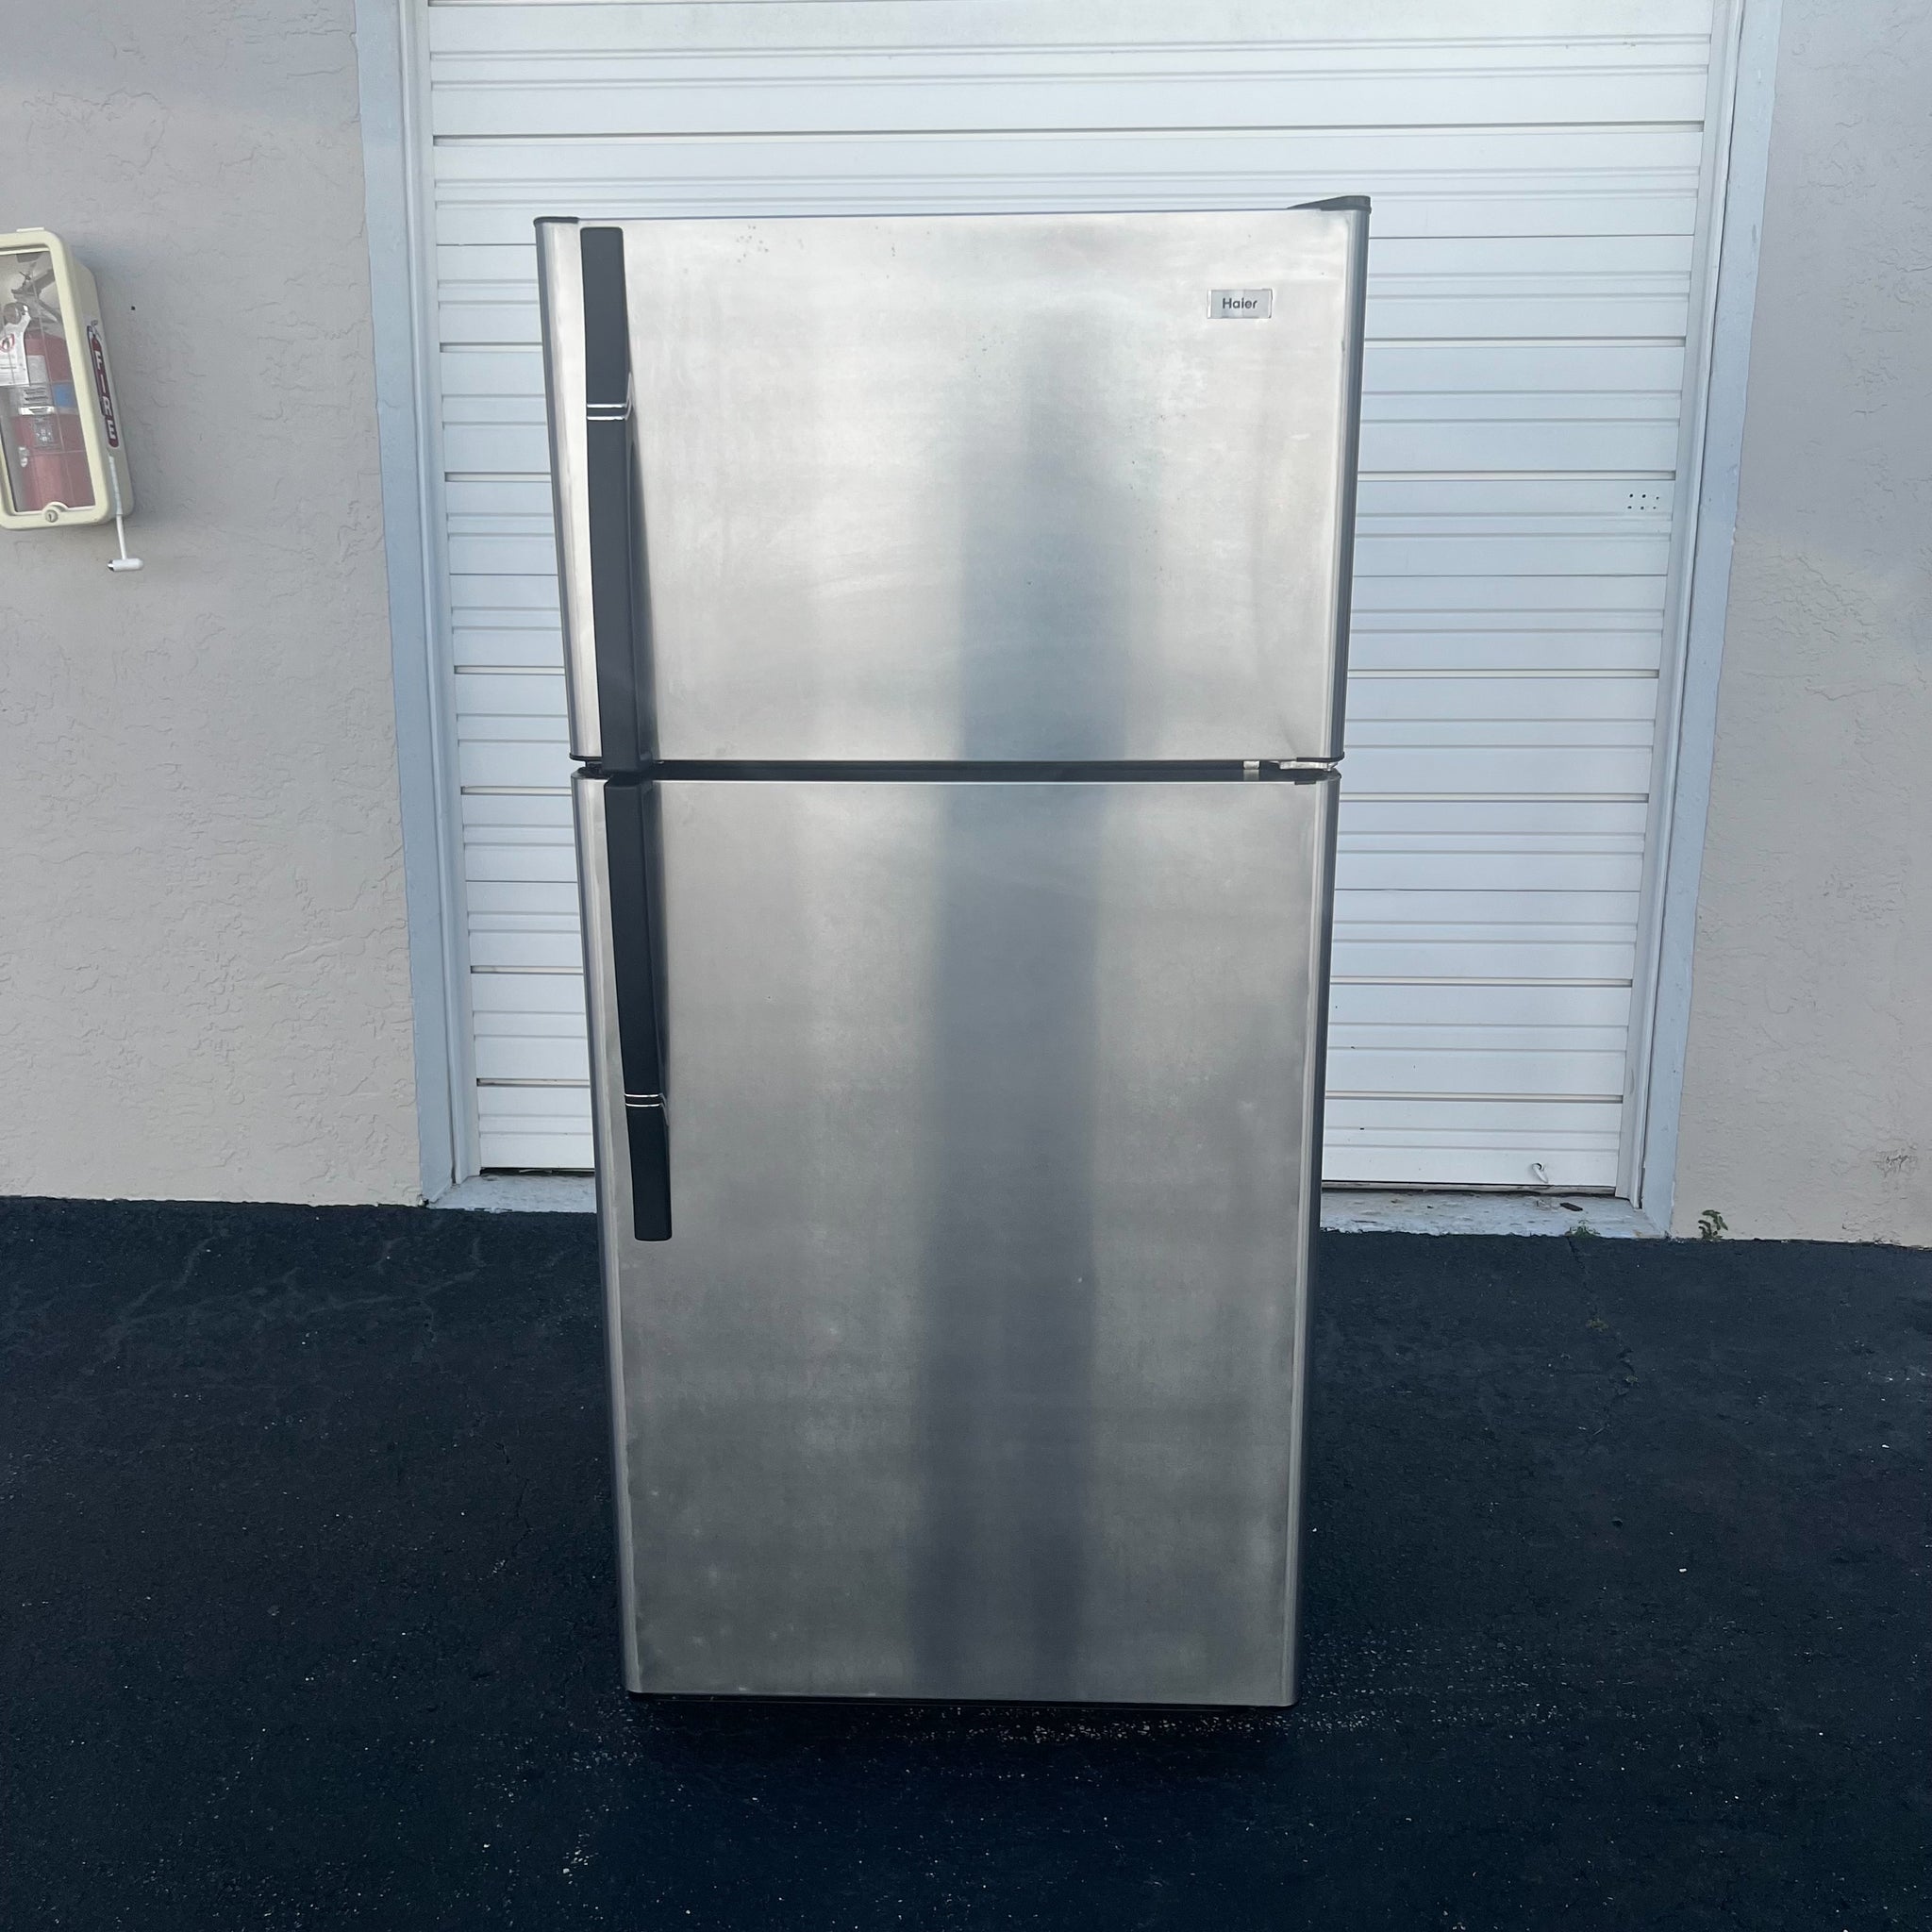 Haier Stainless Steel Top and Bottom Refrigerator